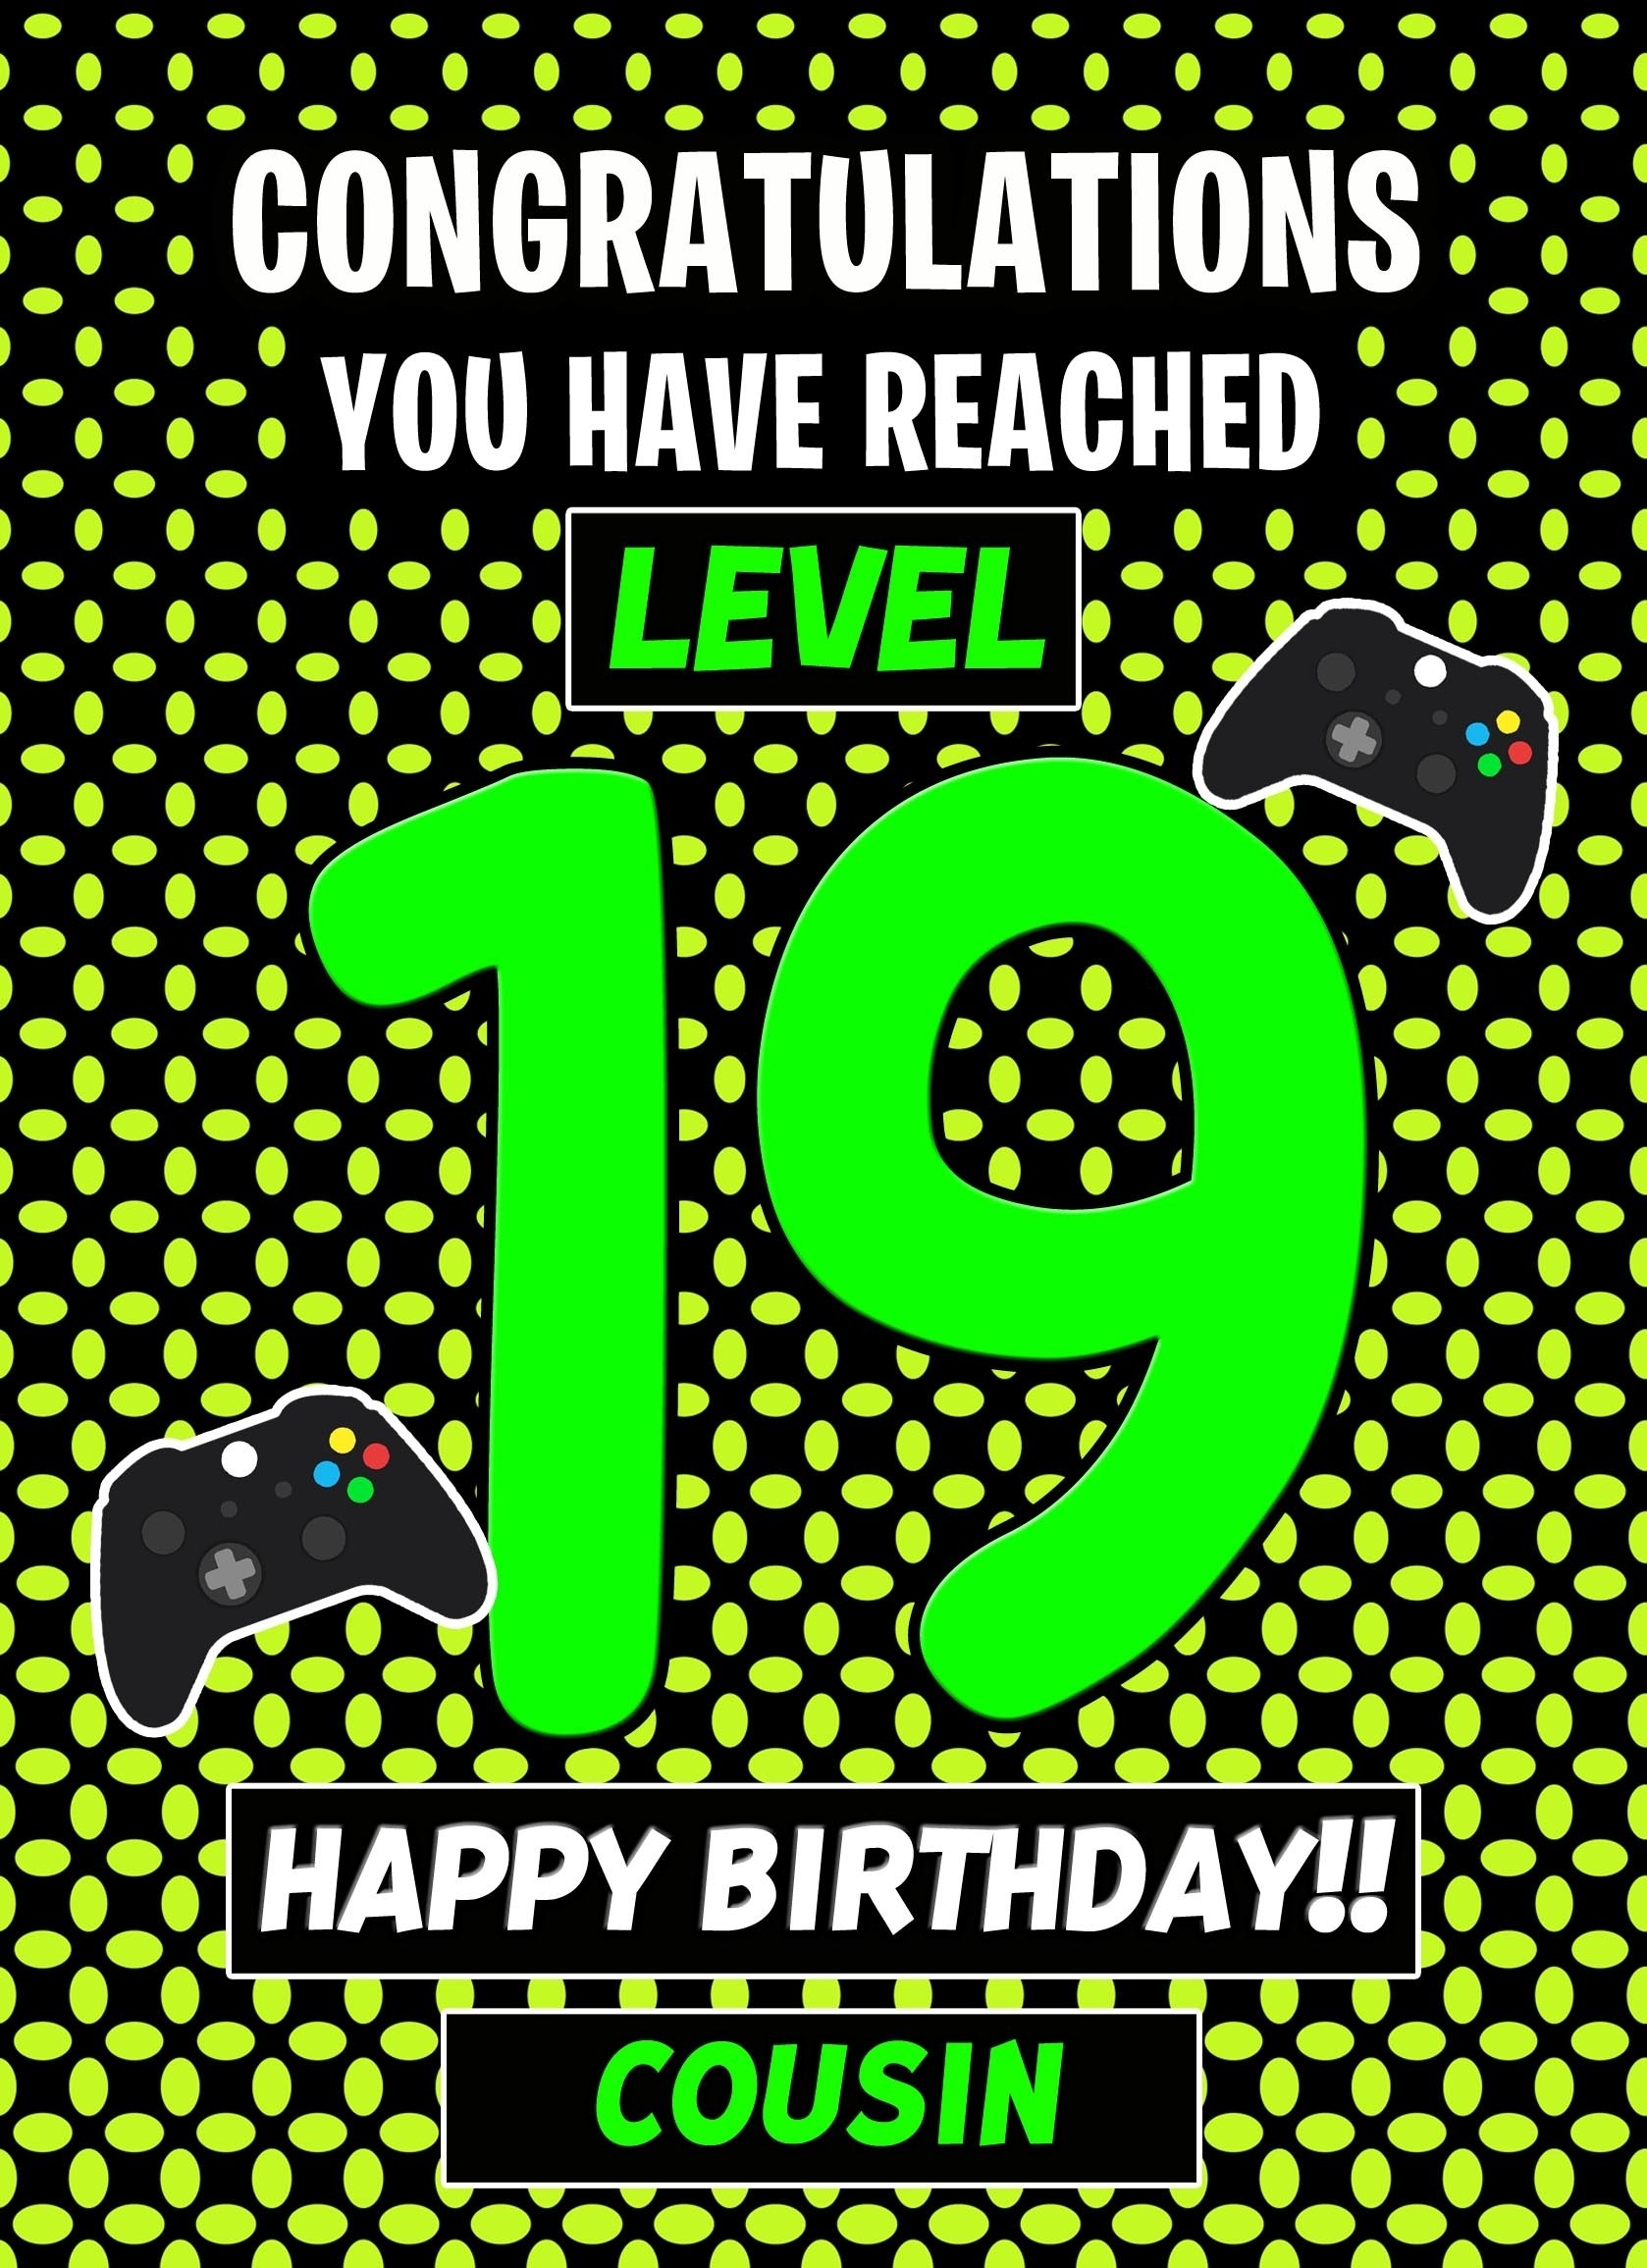 Cousin 19th Birthday Card (Level Up Gamer)